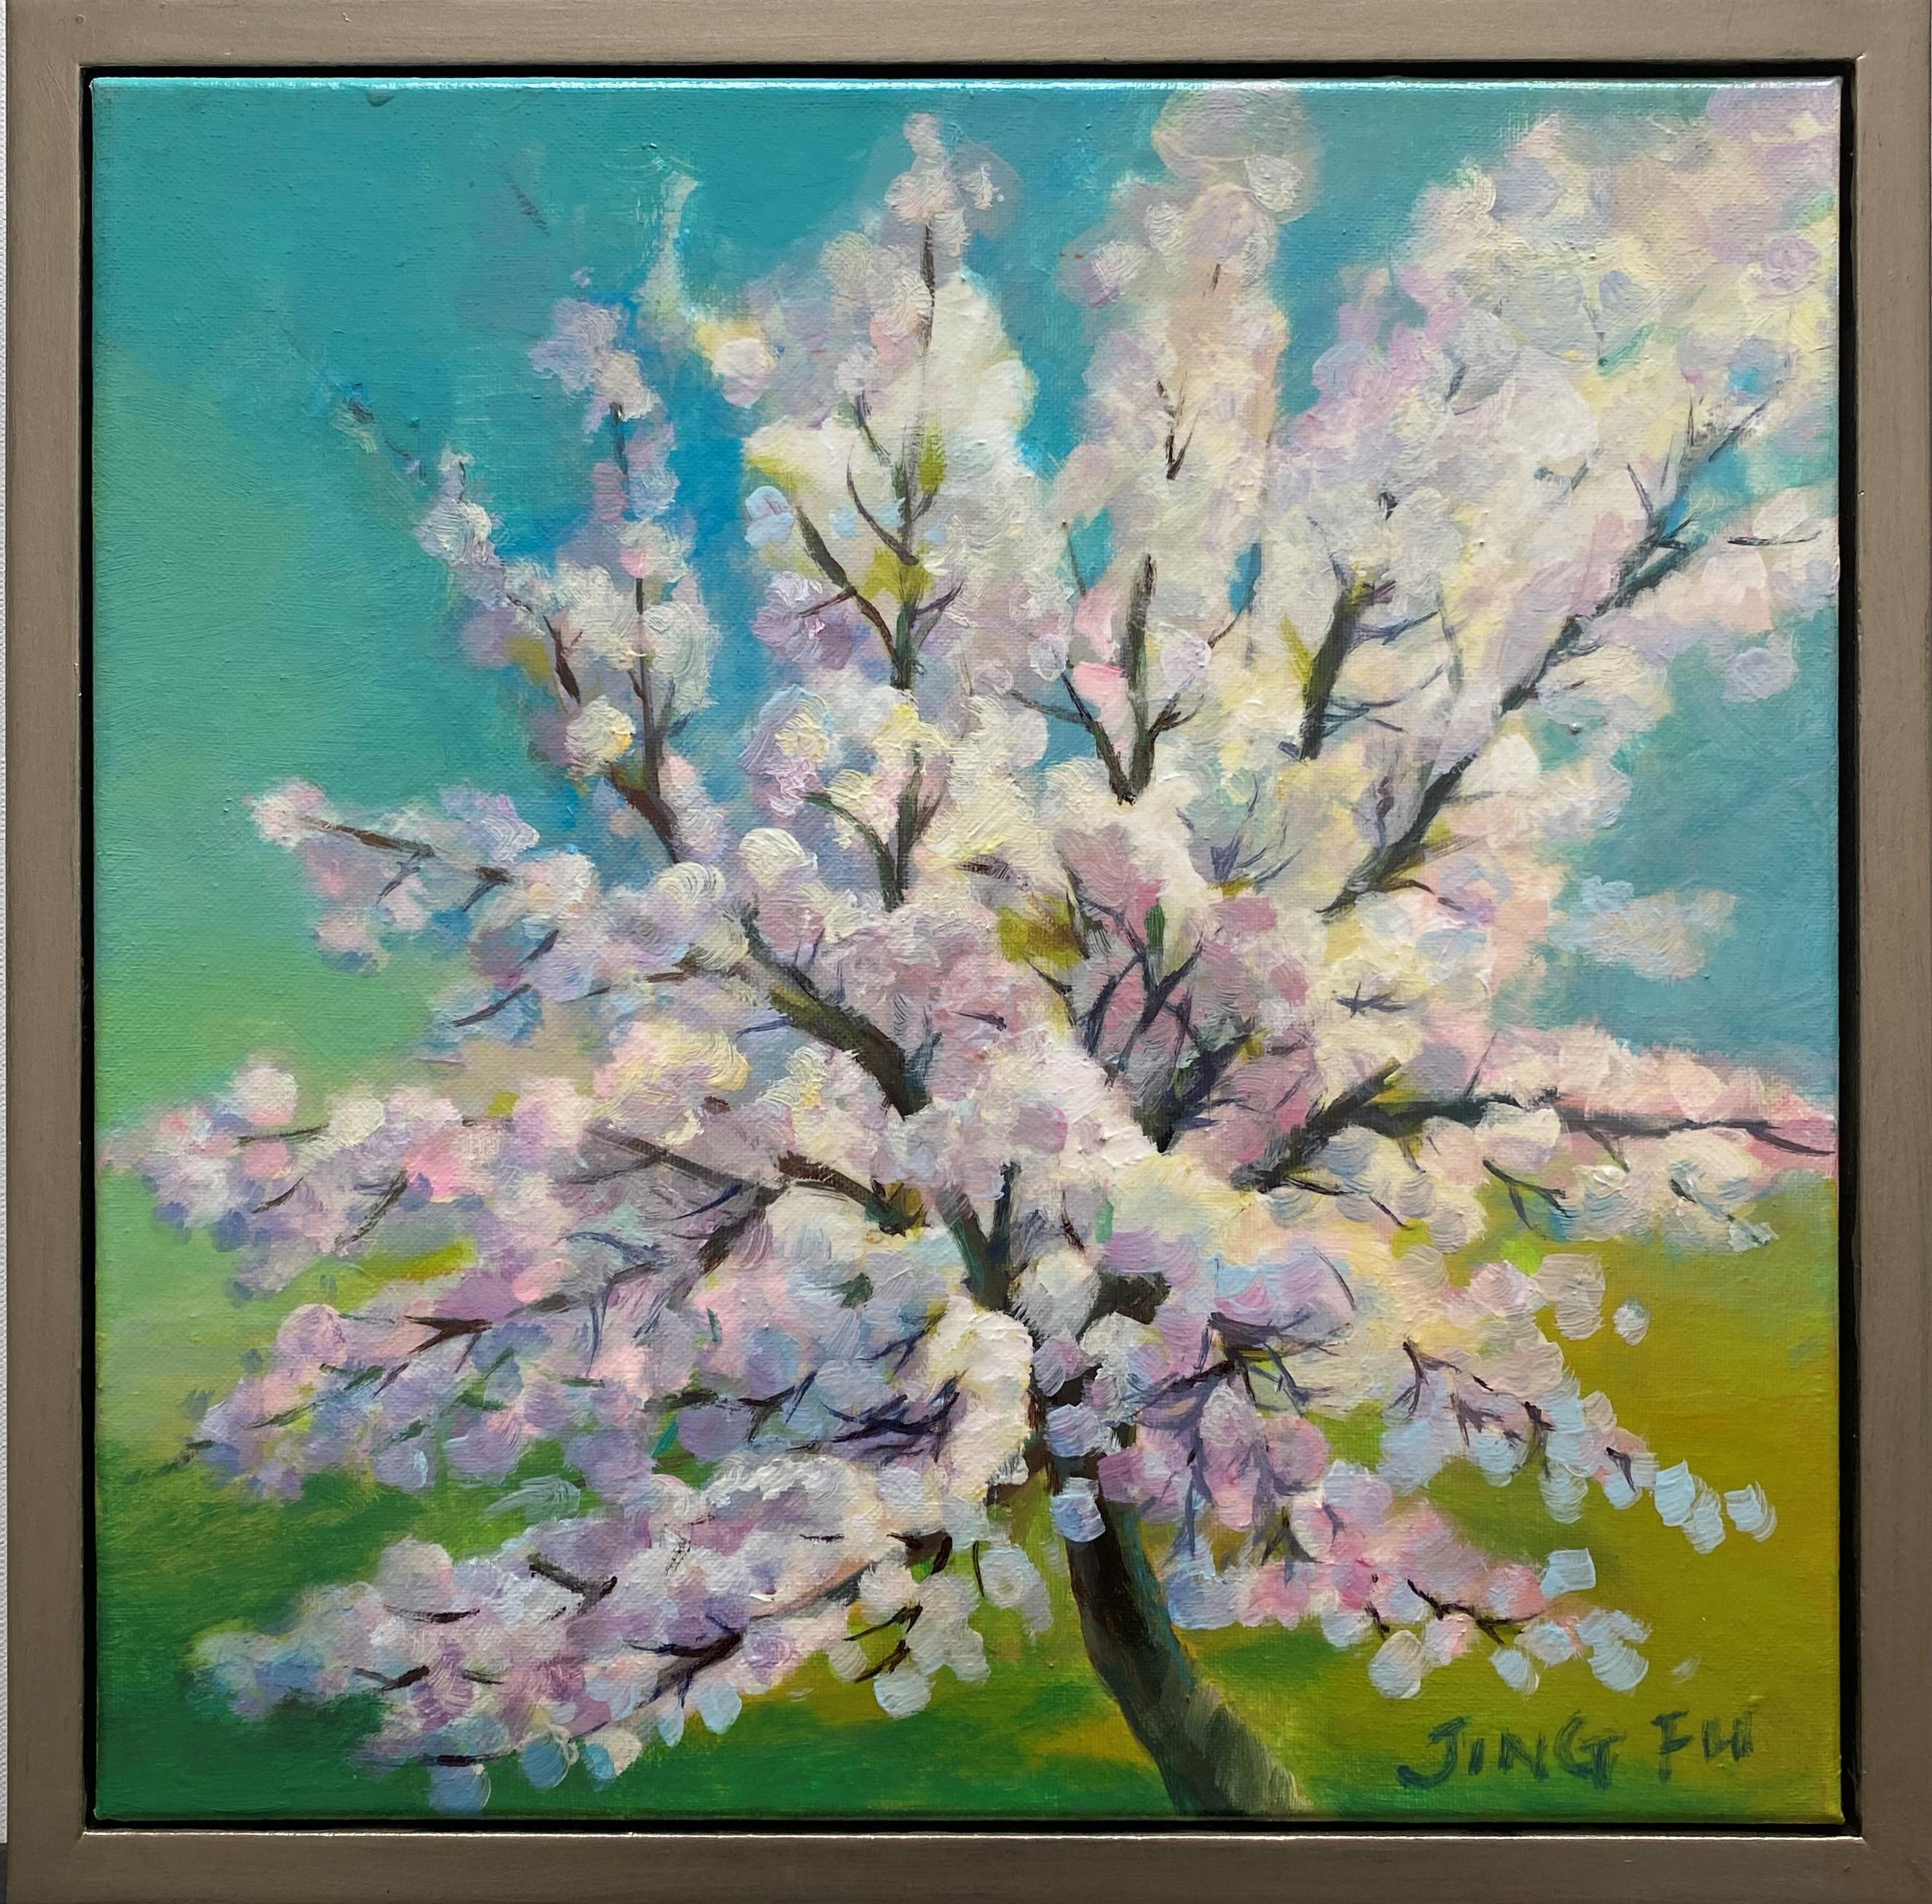 Blue Dream (cherry blossom tree in bloom floral colorful pink white flowers) - Painting by Jing Fu